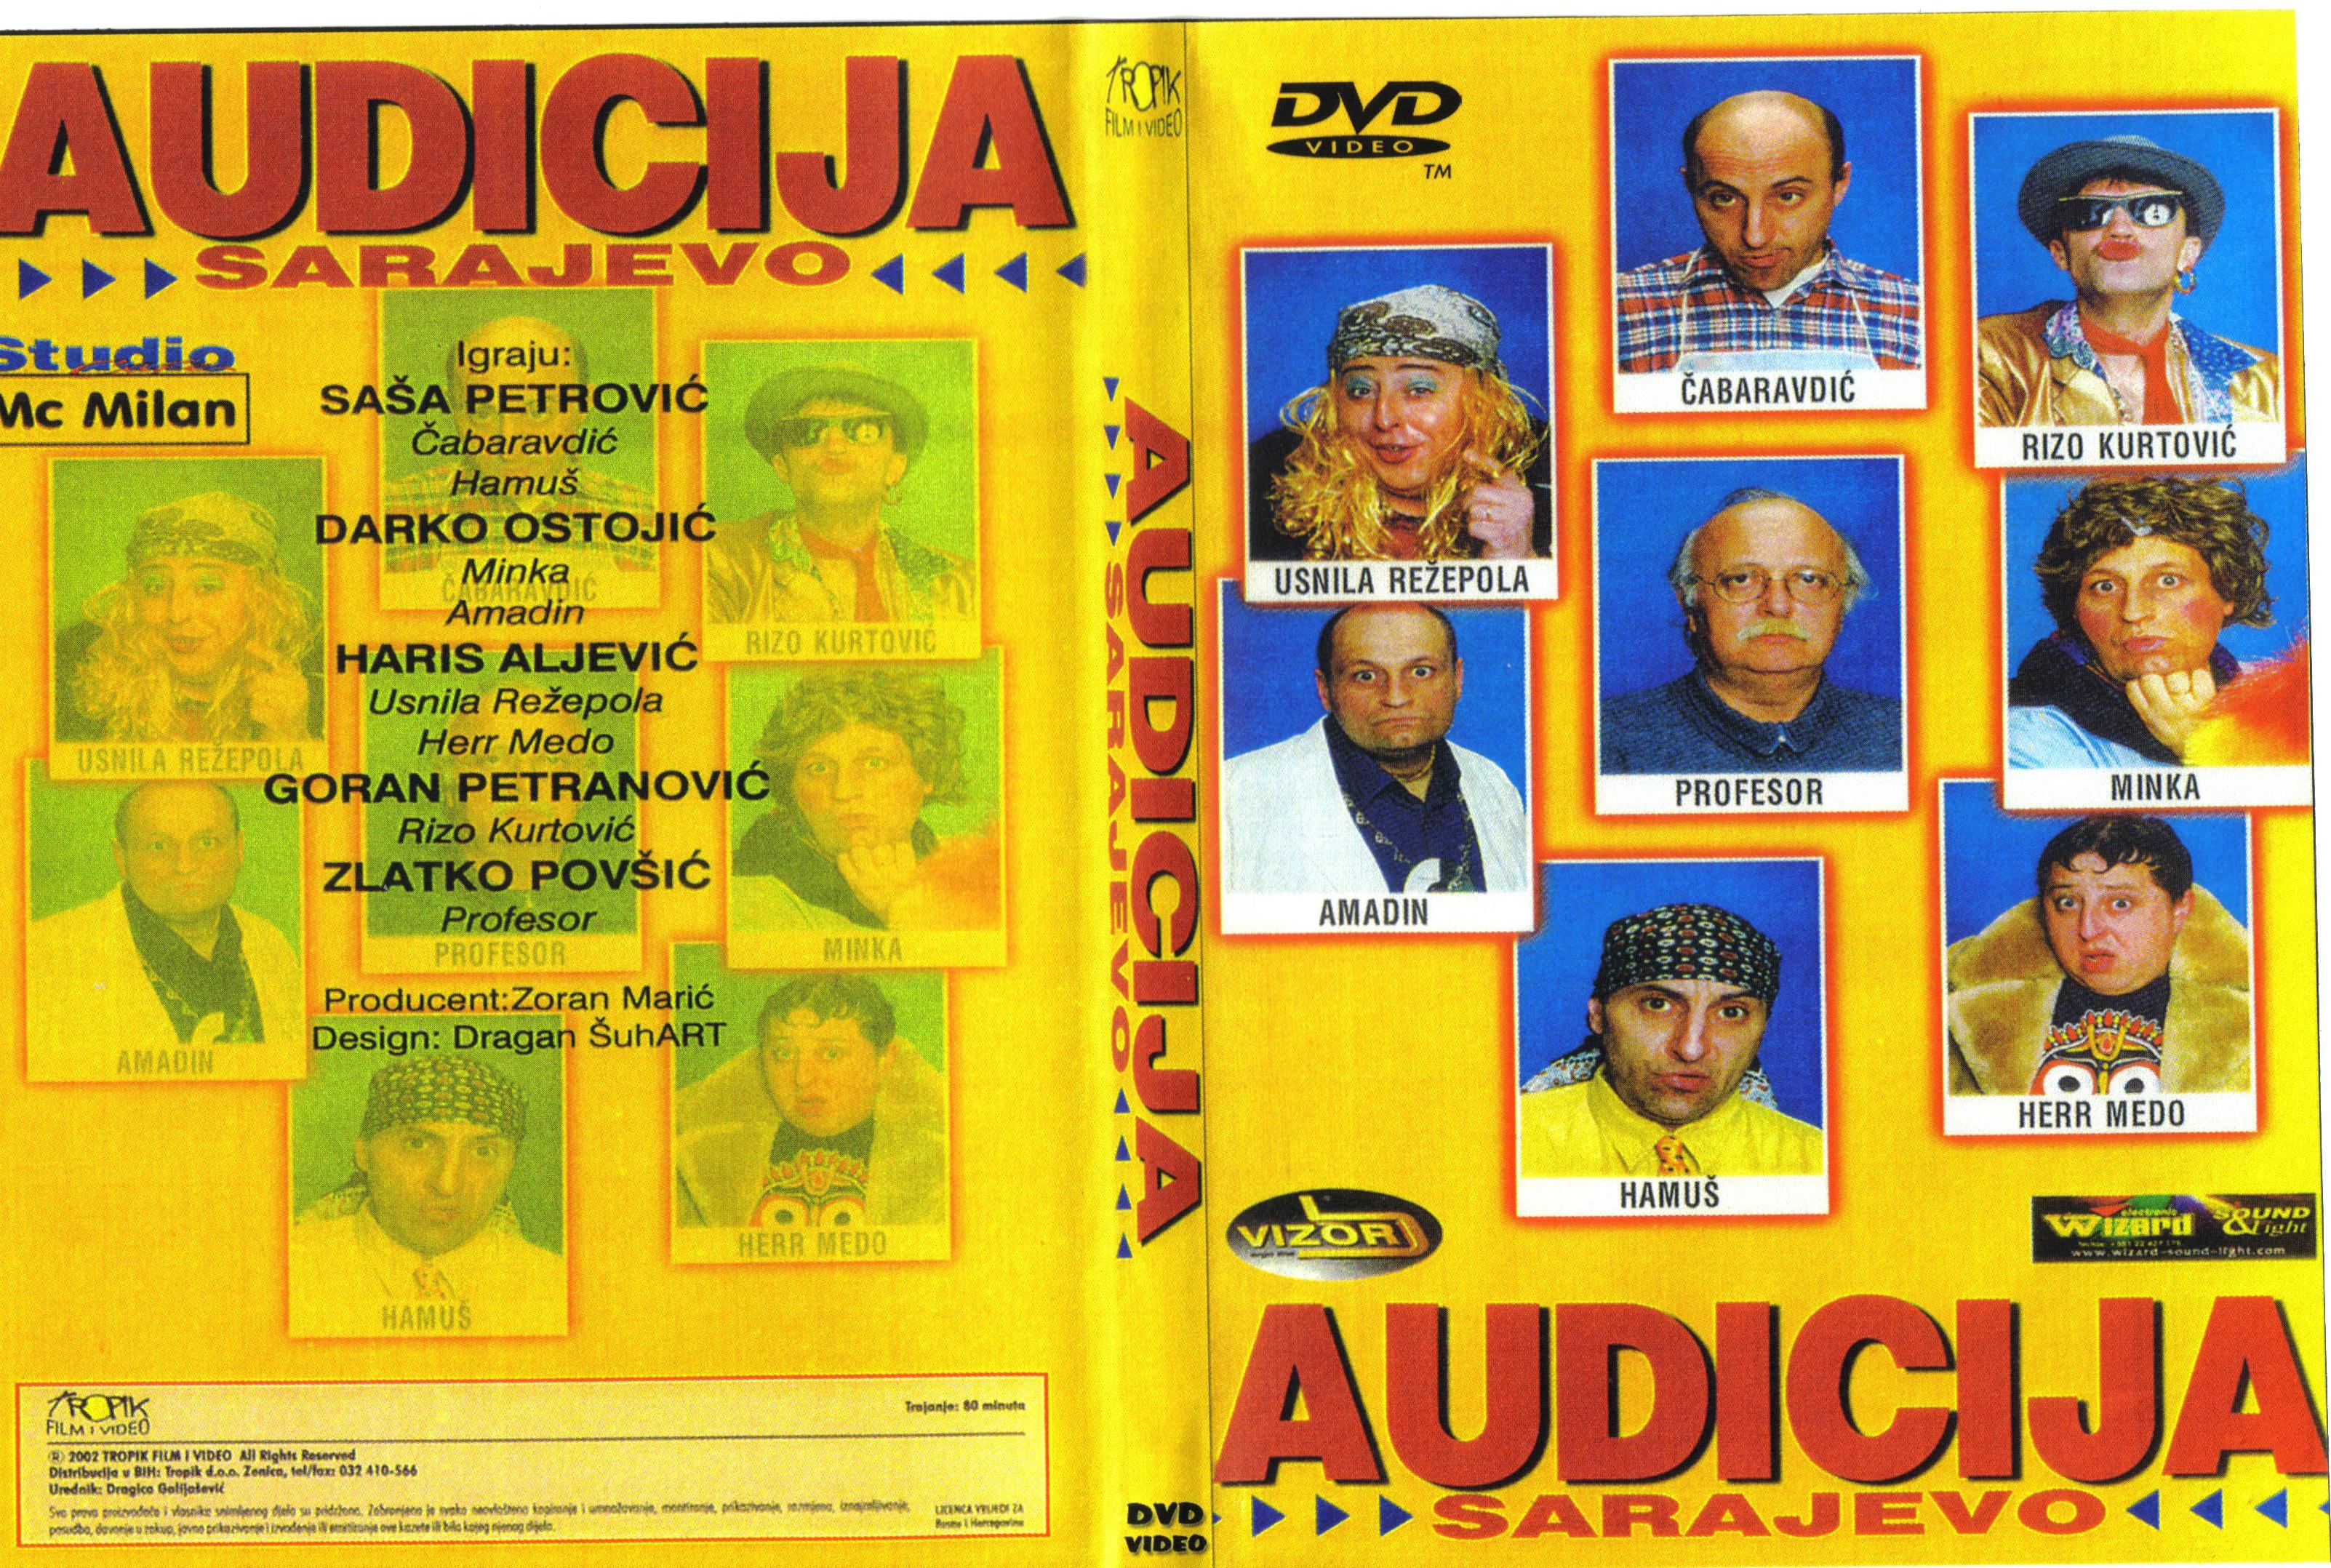 Click to view full size image -  DVD Cover - A - DVD - AUDICIJA SARAJEVO - DVD - AUDICIJA SARAJEVO.JPG